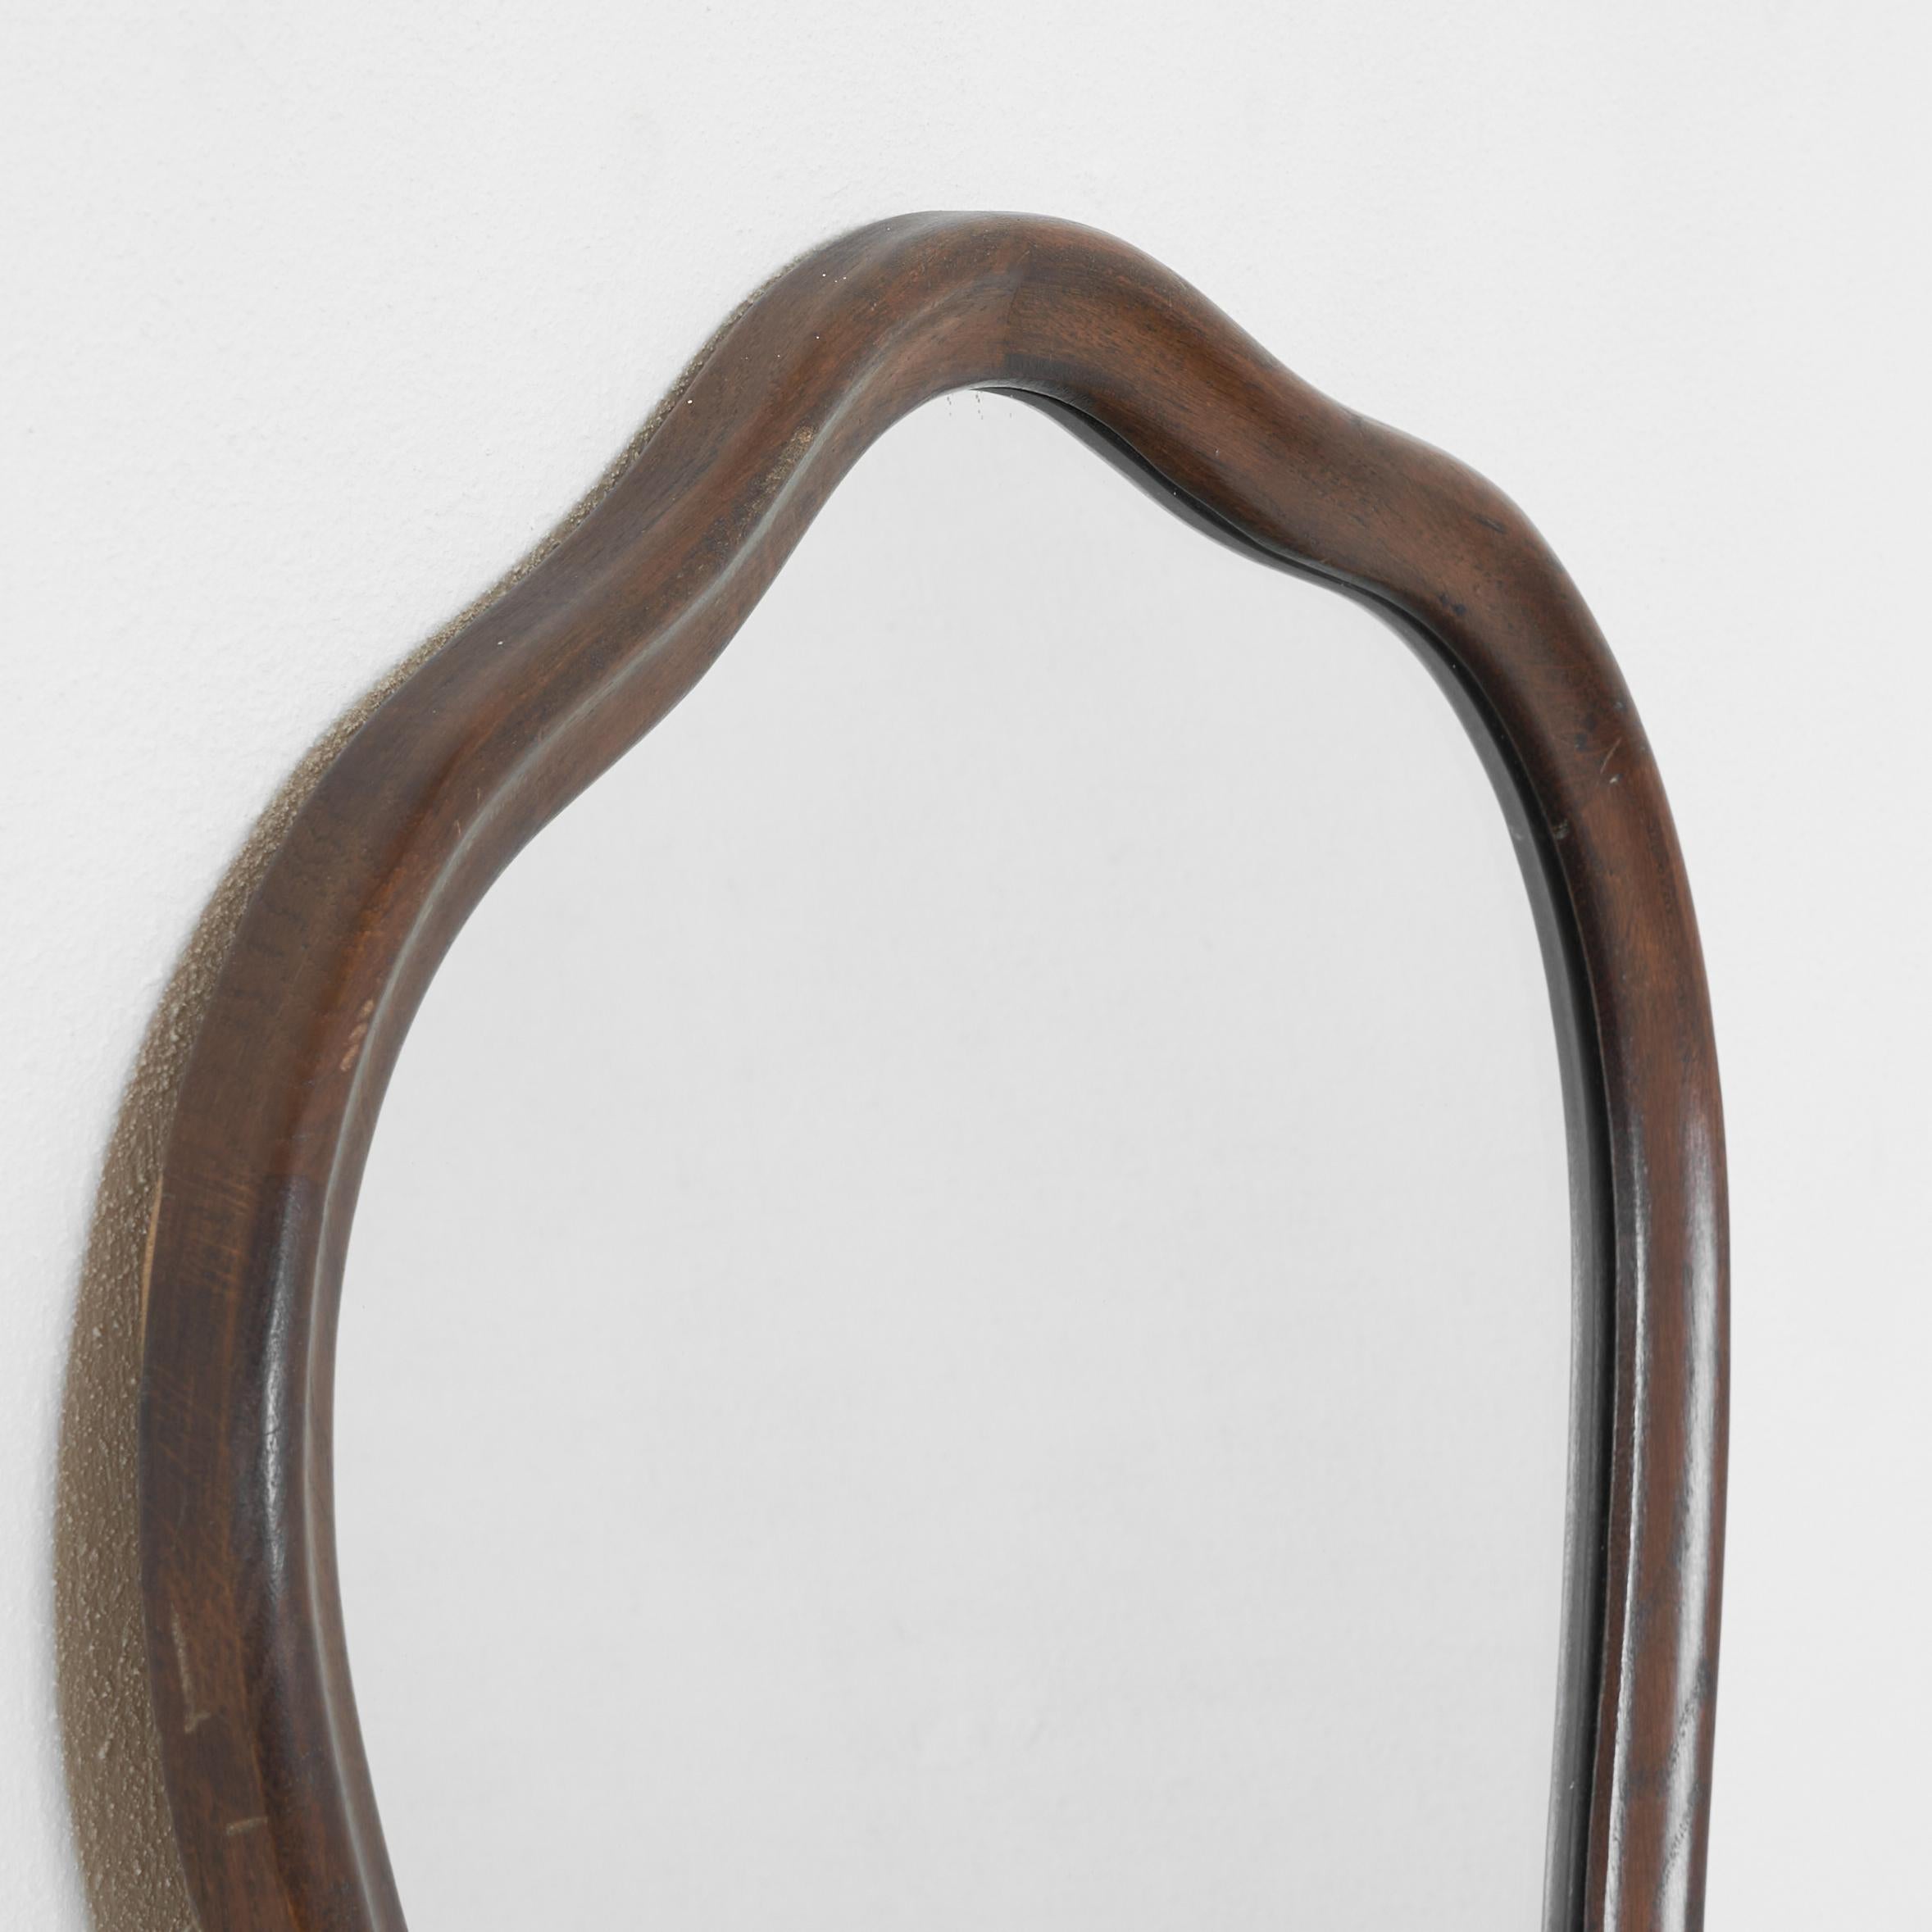 20th Century Art Deco Sculptural Mirror in Wood, 1930s For Sale